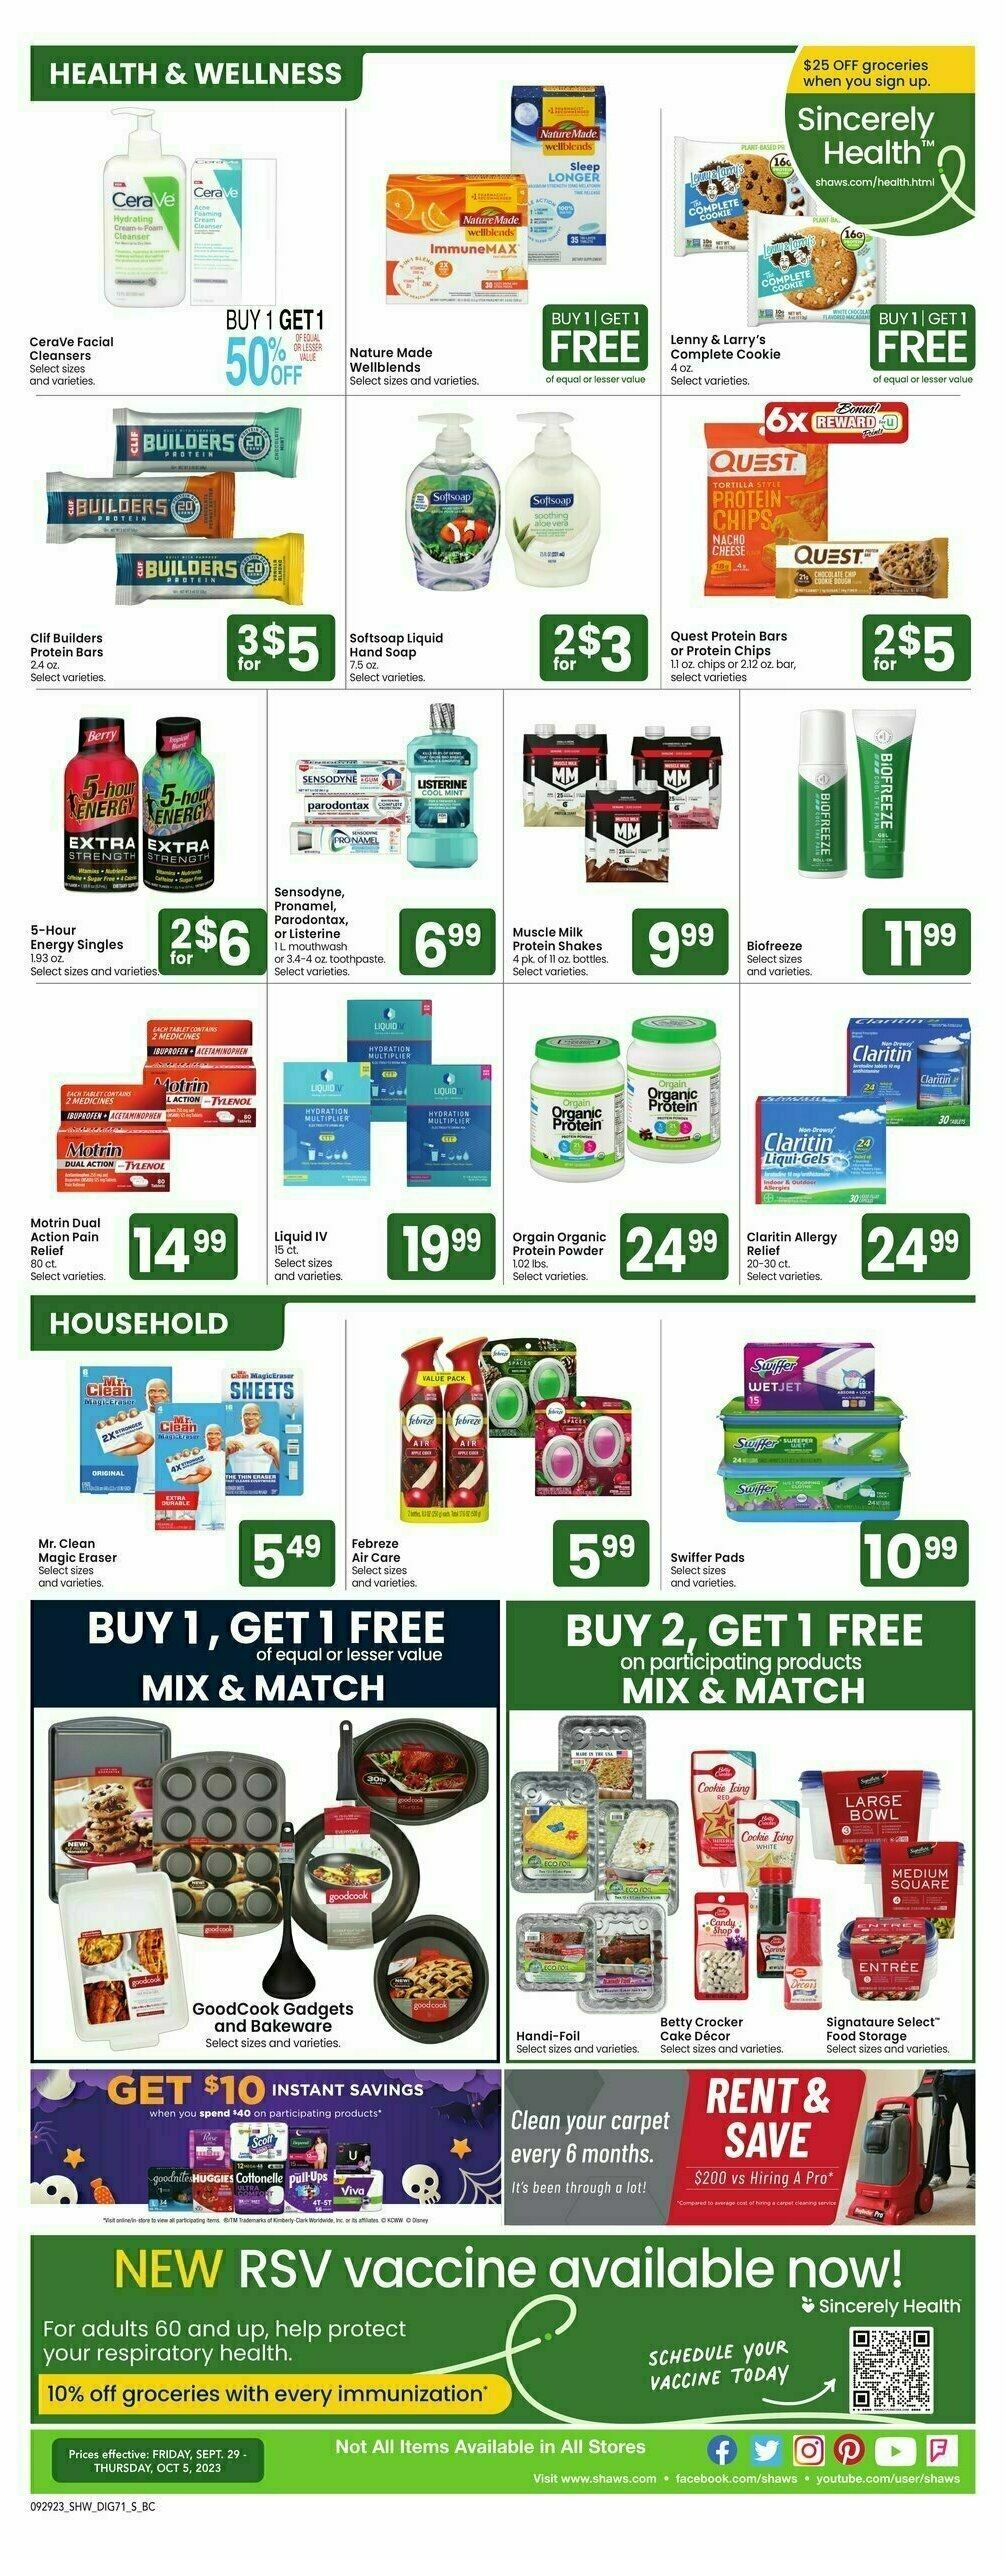 Shaw's Additional Savings Weekly Ad from September 29